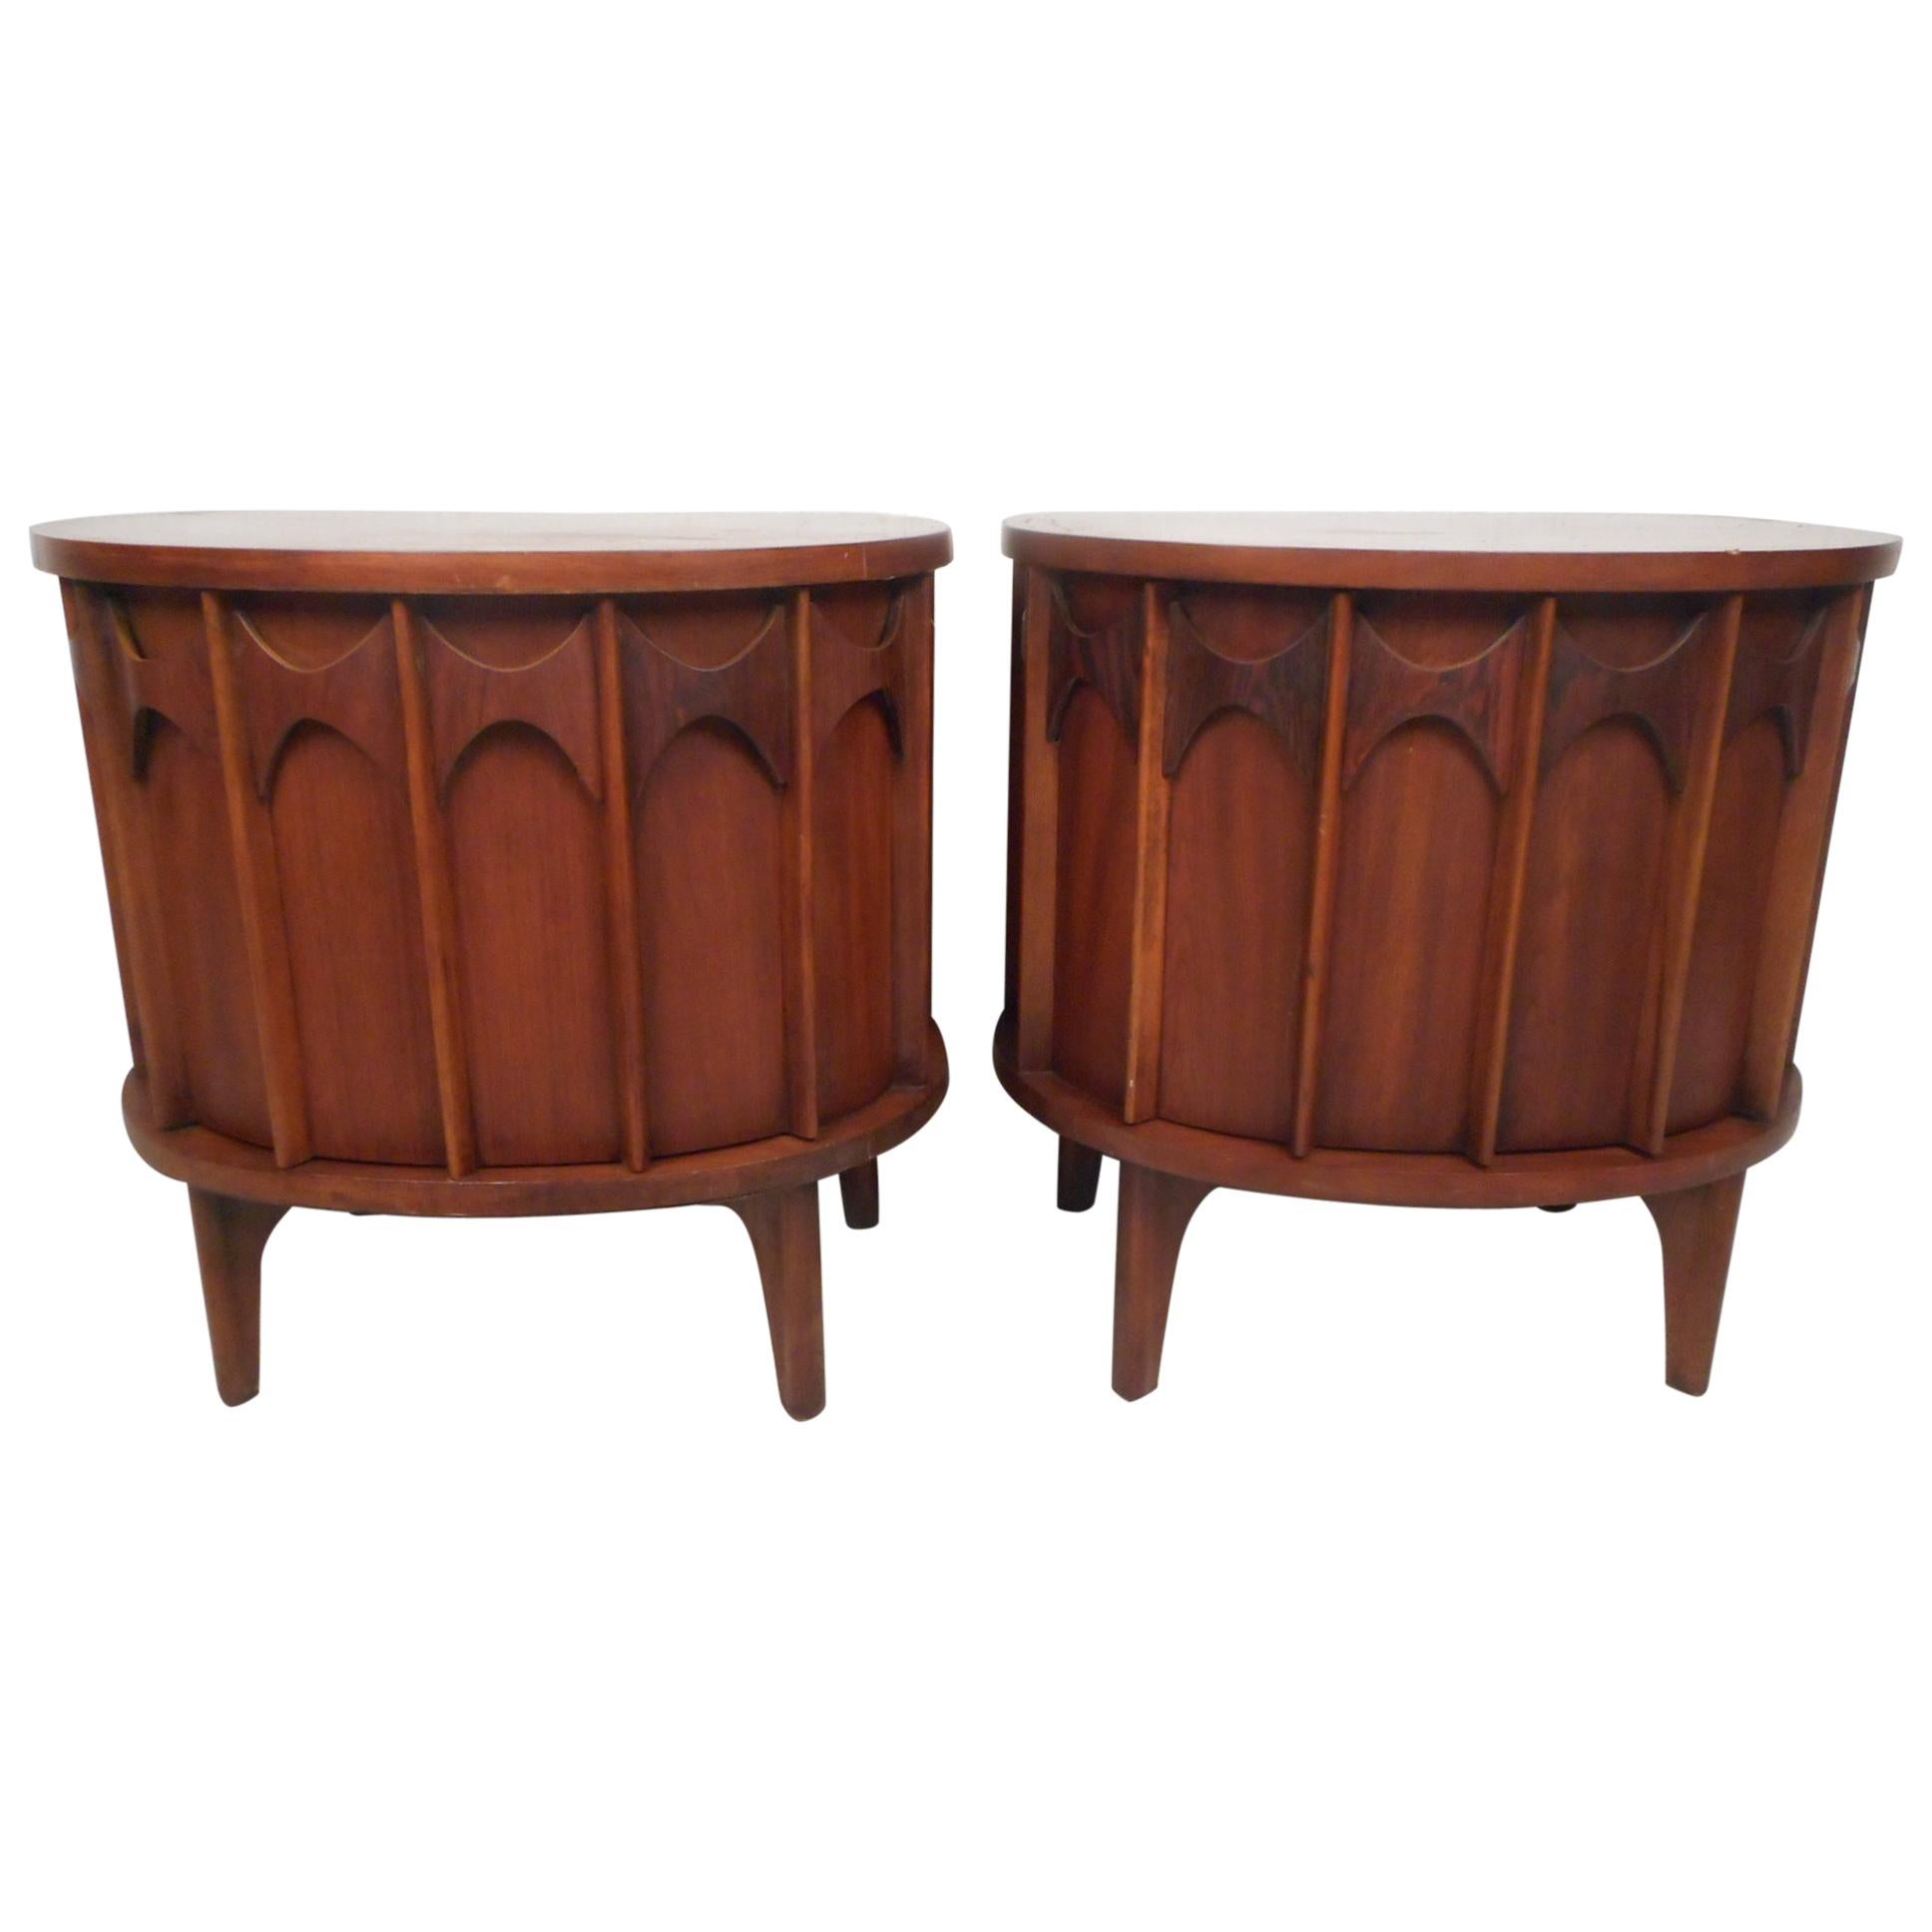 Pair of Kent Coffey "Perspecta" End Tables